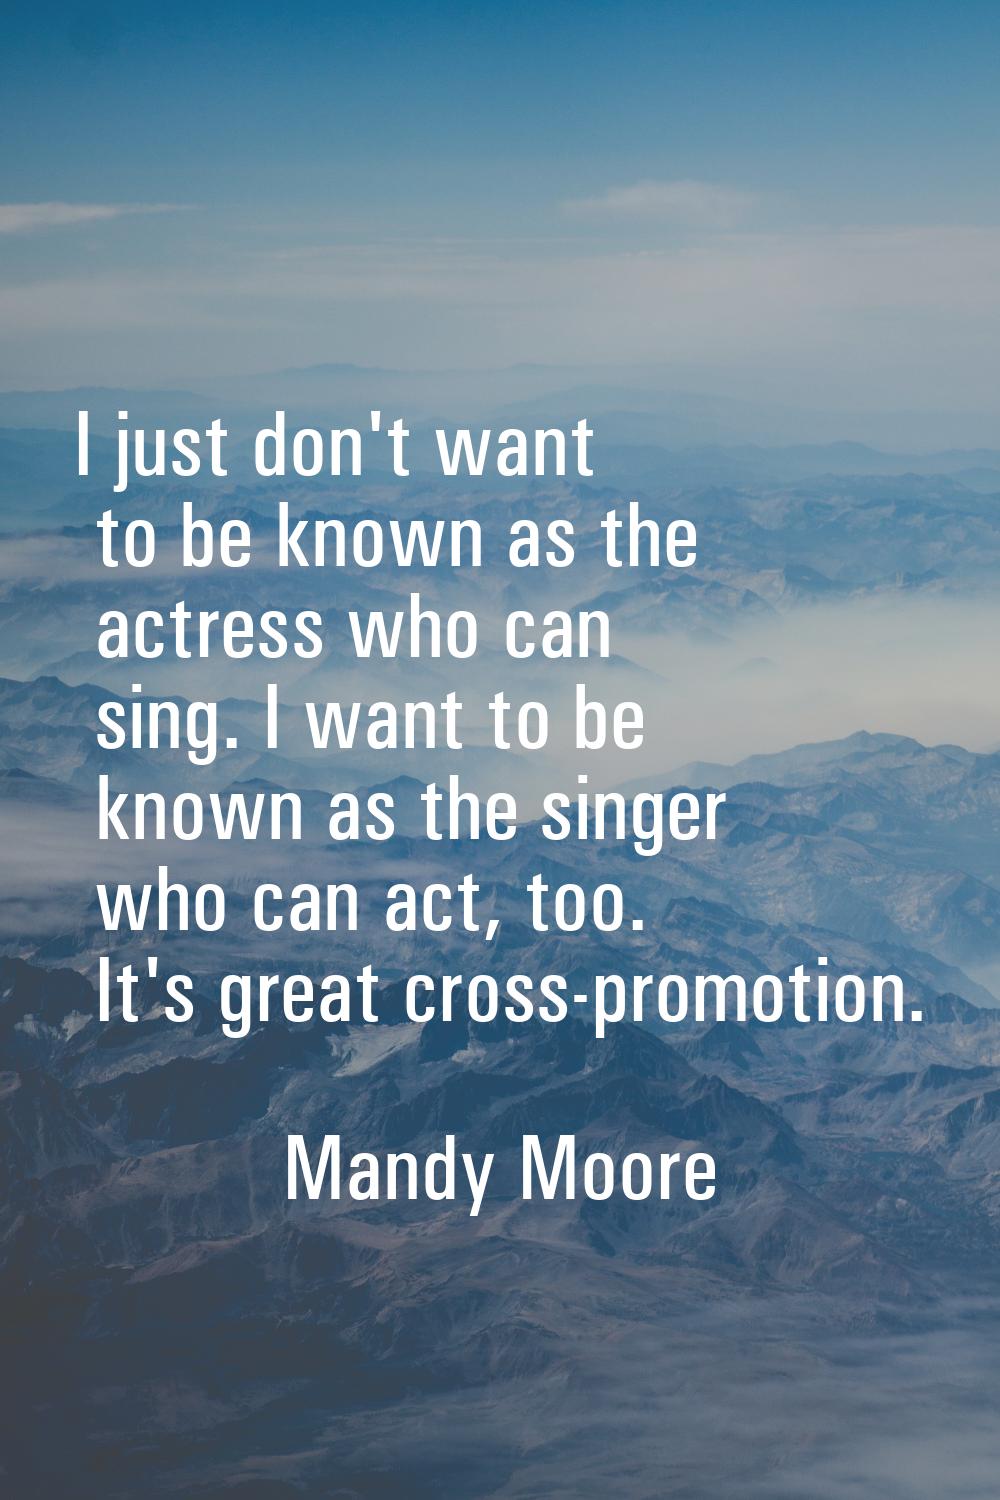 I just don't want to be known as the actress who can sing. I want to be known as the singer who can